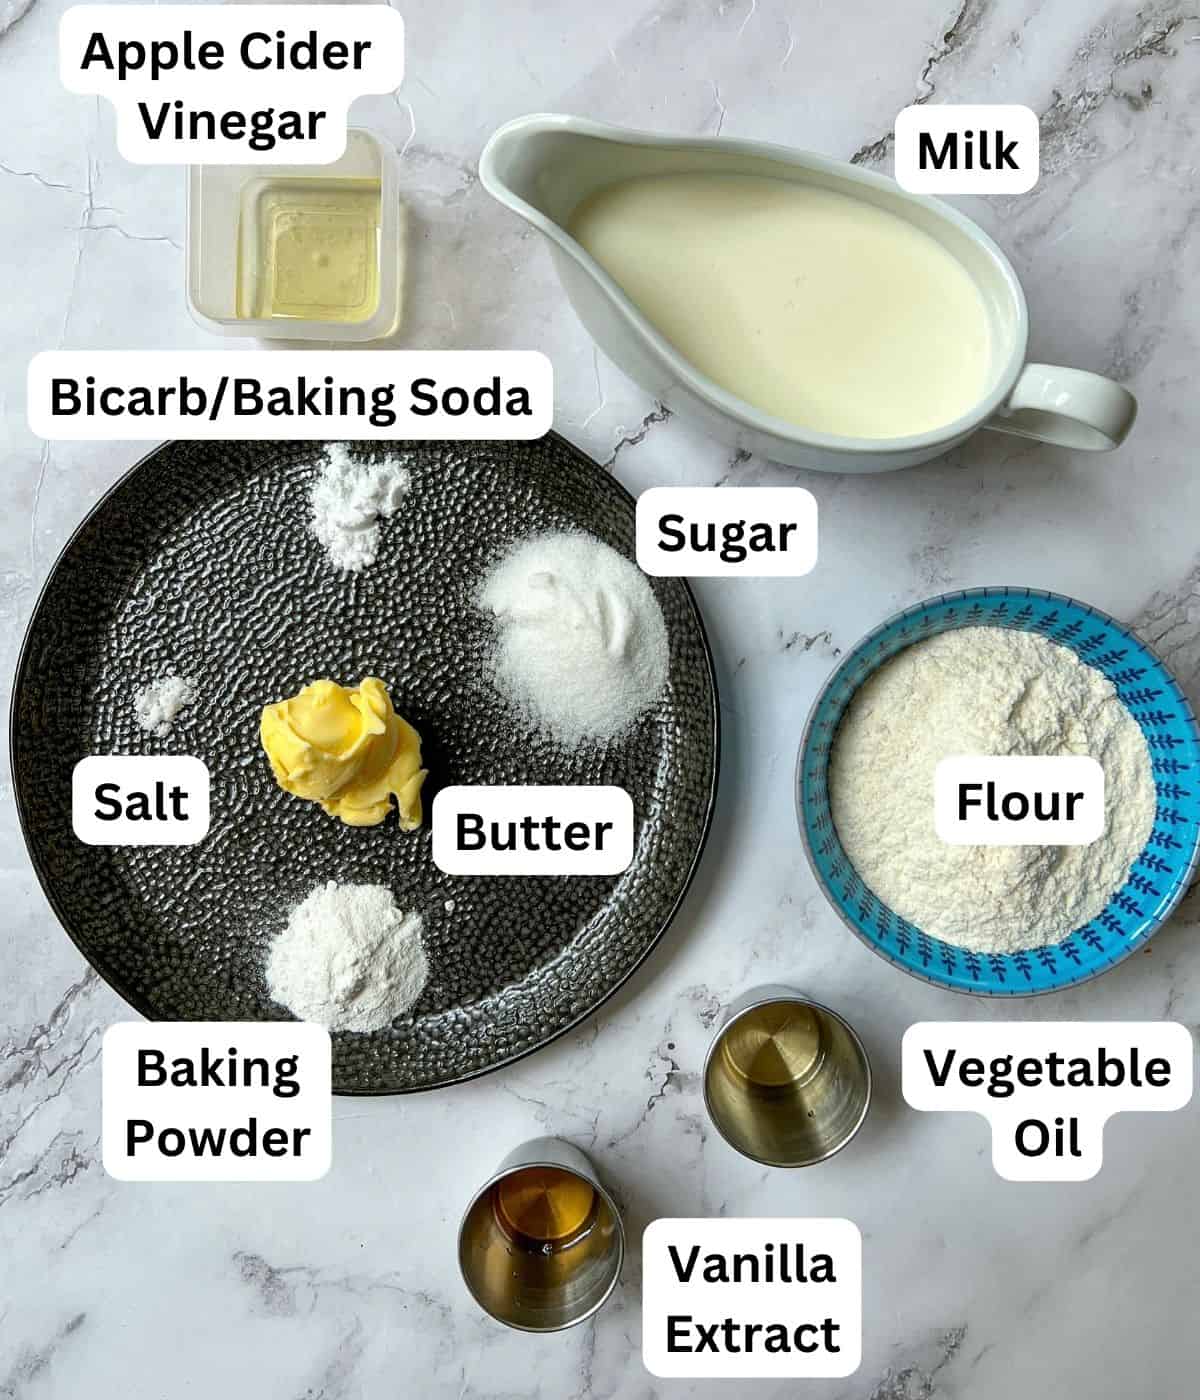 Ingredients laid out for egg free pancakes.